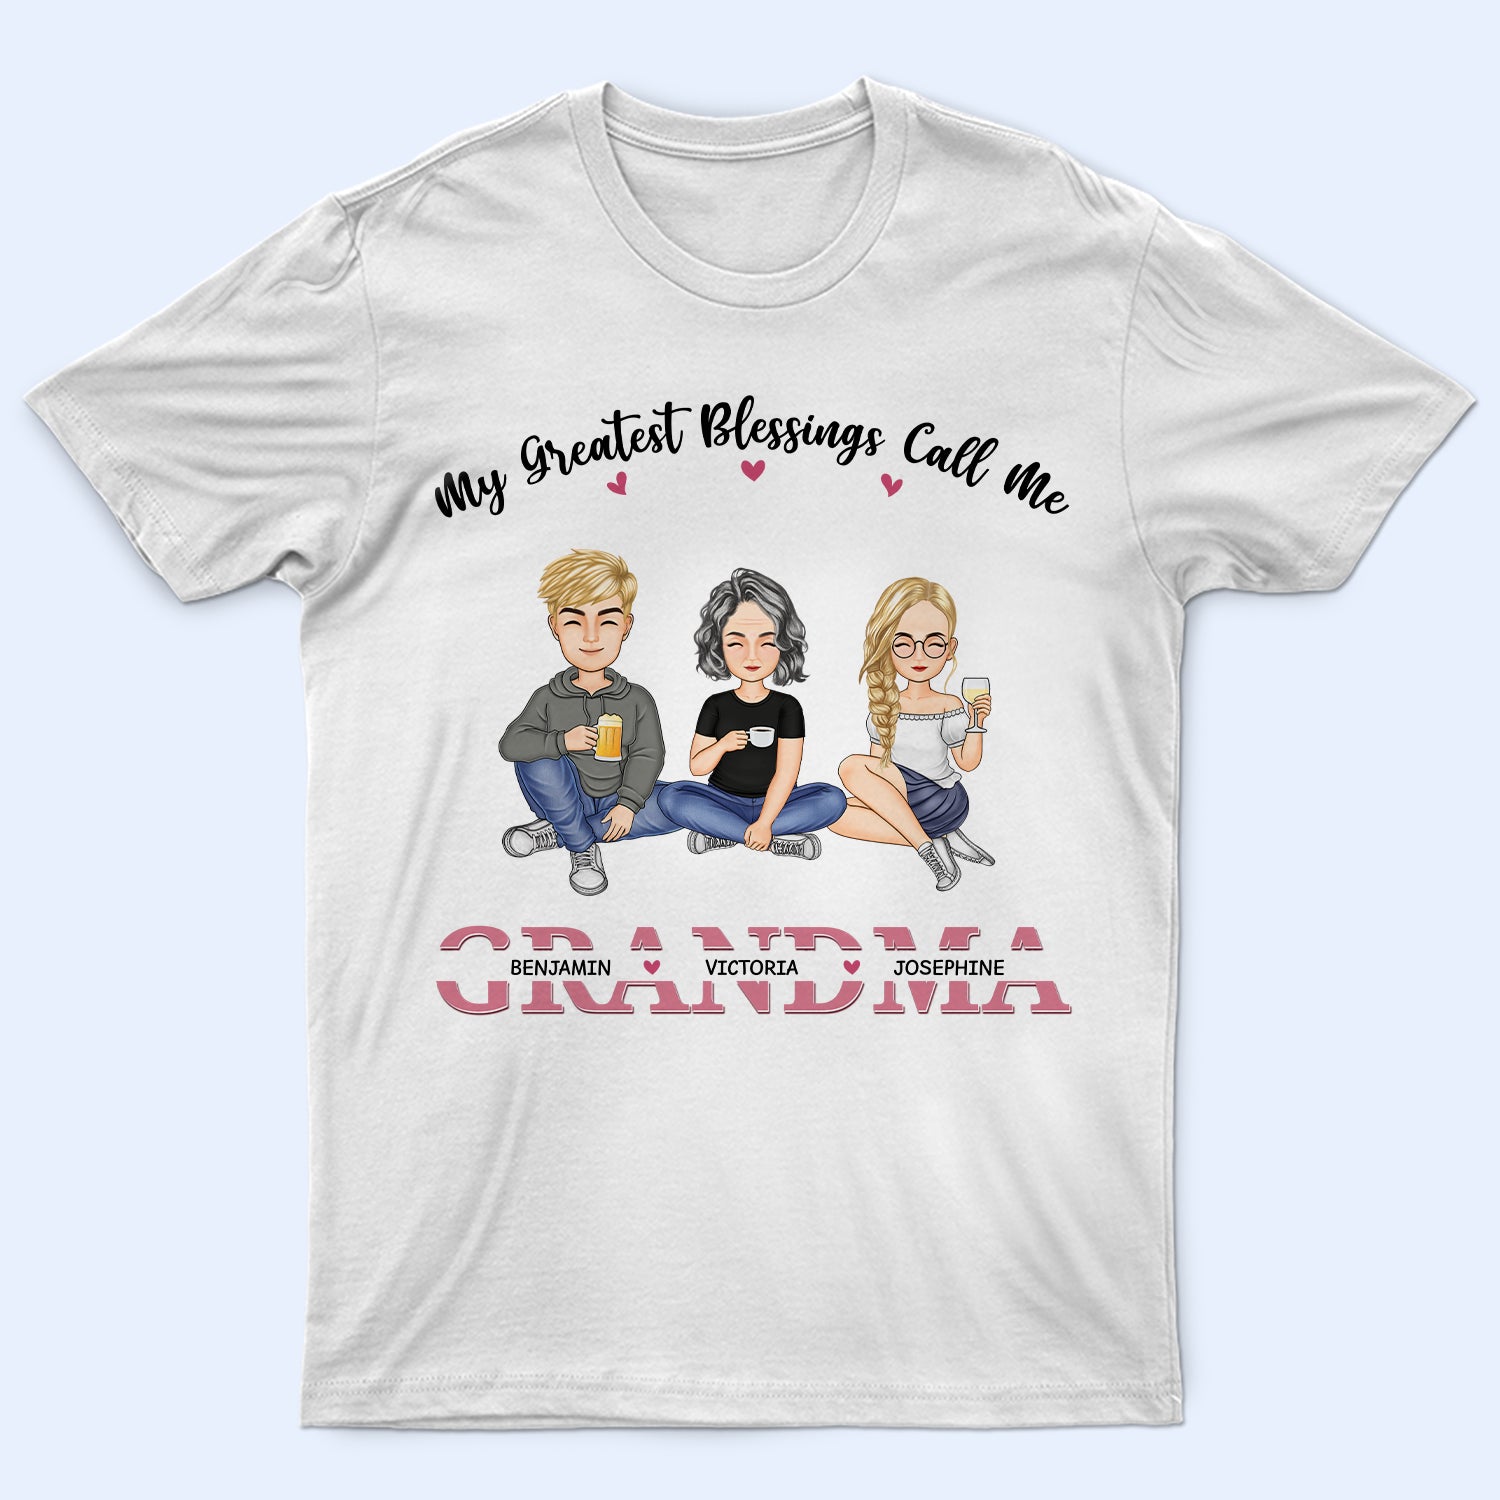 My Greatest Blessings Call Me - Gift For Mom, Grandma - Personalized T Shirt